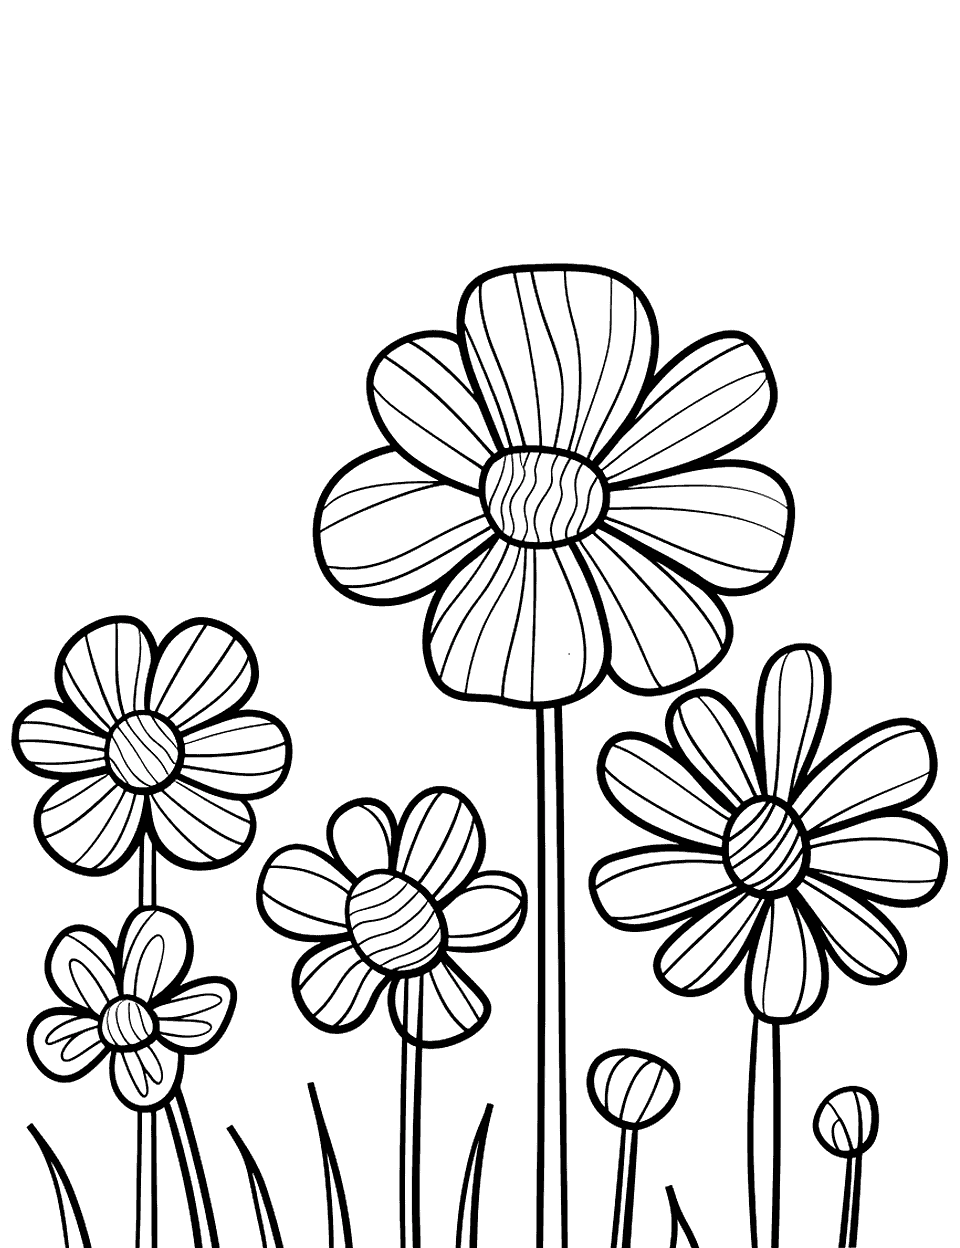 Blooming Flower Garden Toddler Coloring Page - Several large, simple flowers blooming in a garden.